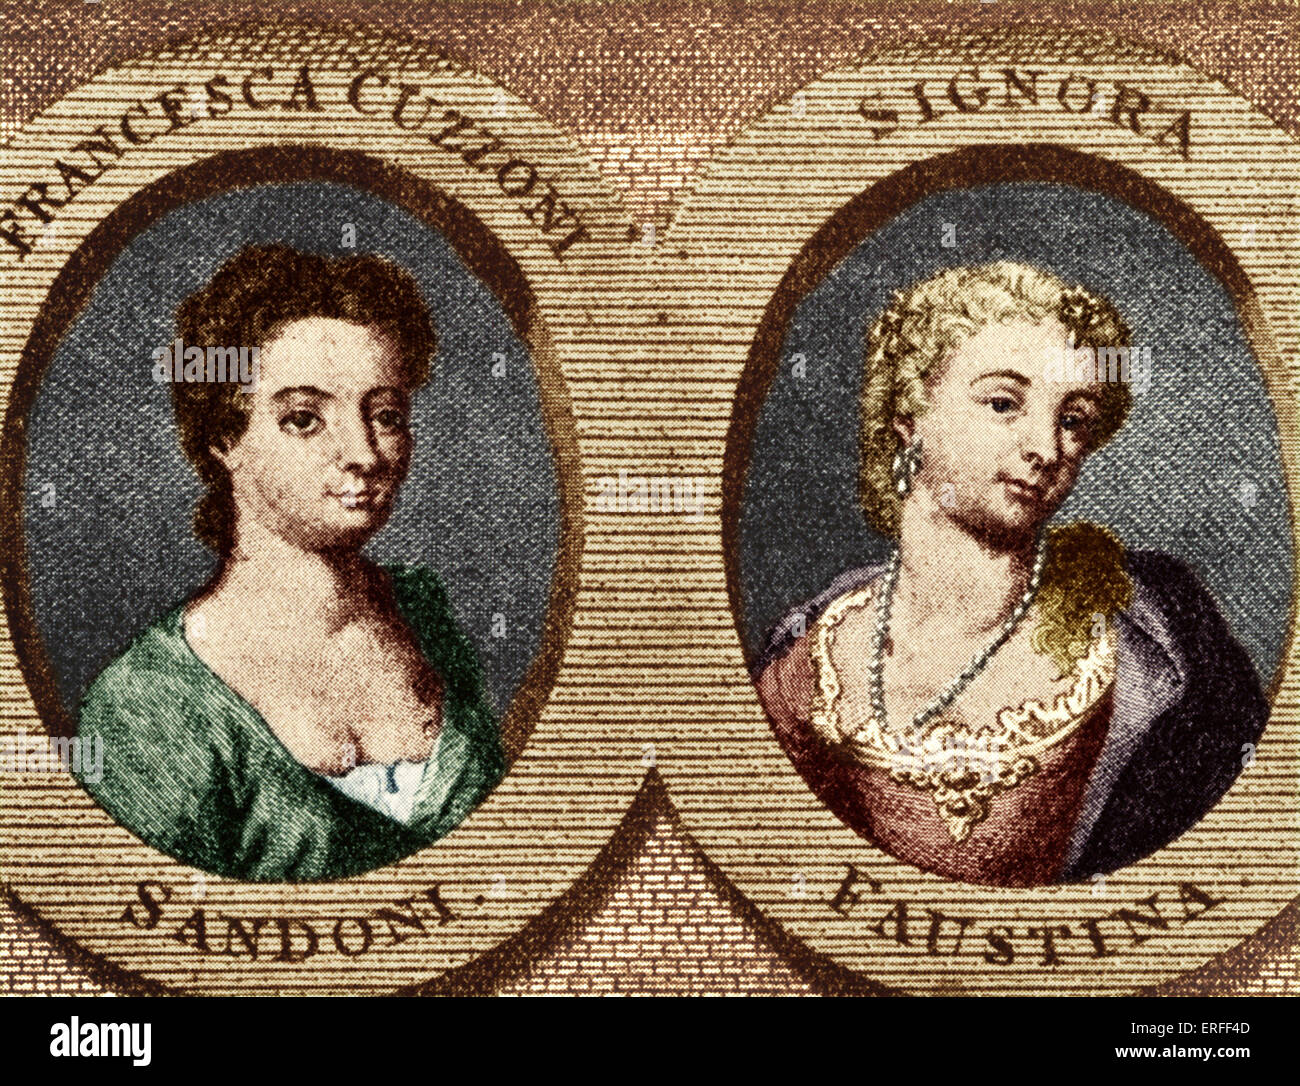 HASSE, Faustina (née BORDONI) with Francesca CUZZONI (Italian Soprano, 1700-1770). Both sopranos were engaged by Handel. Rivals Stock Photo